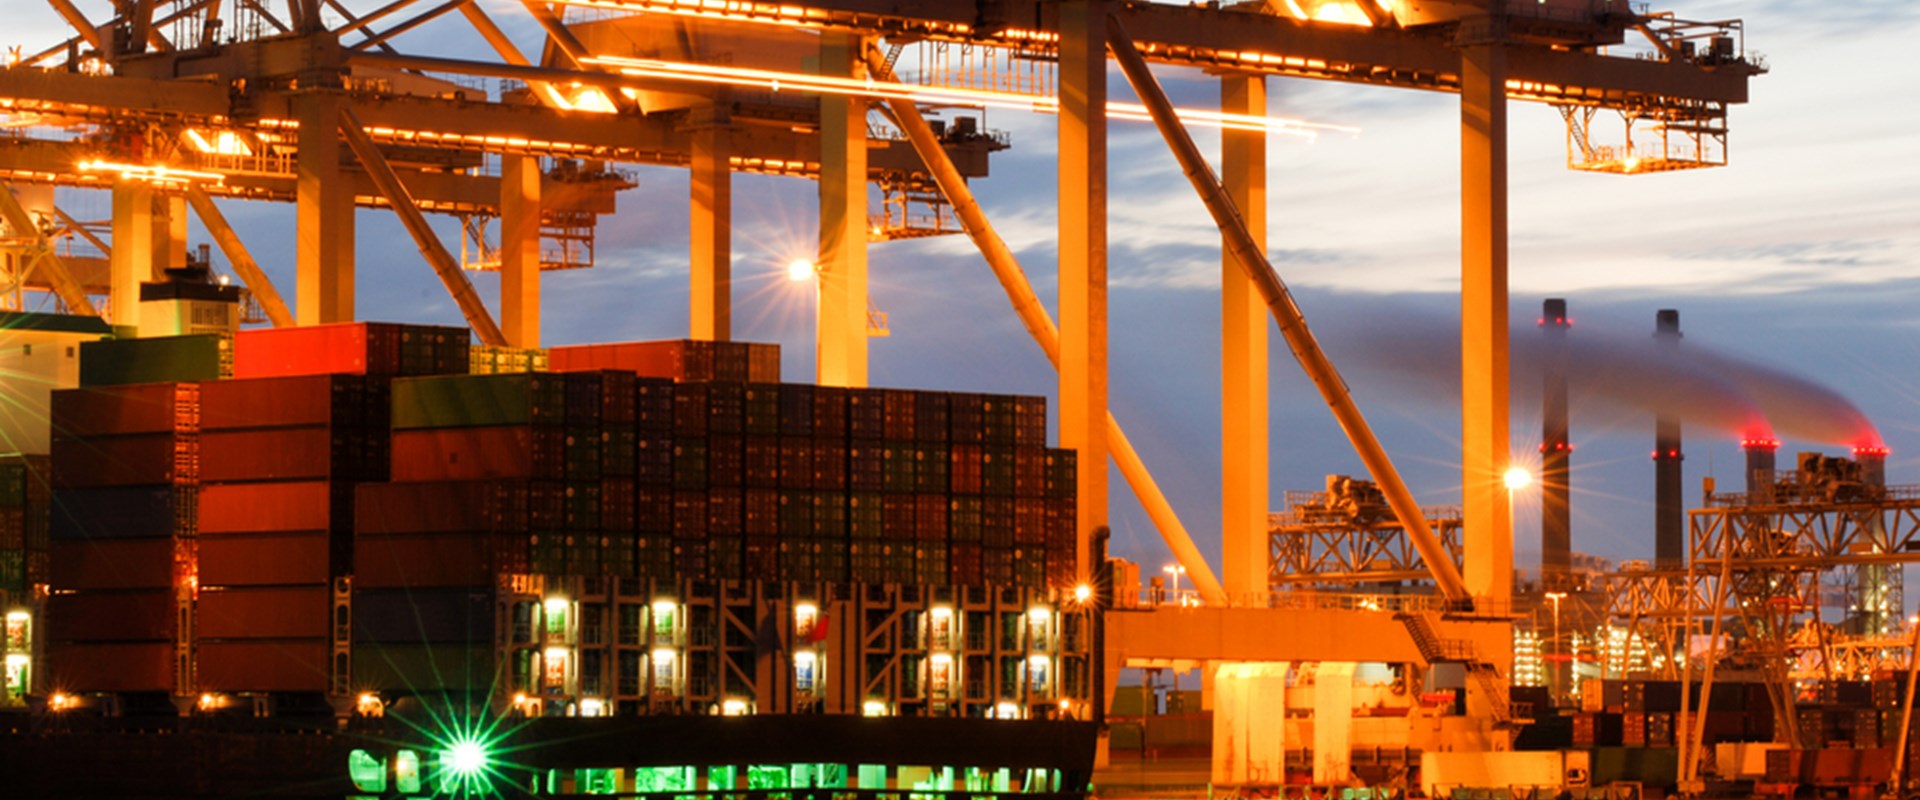 An image of a container vessel docked in a port in the evening